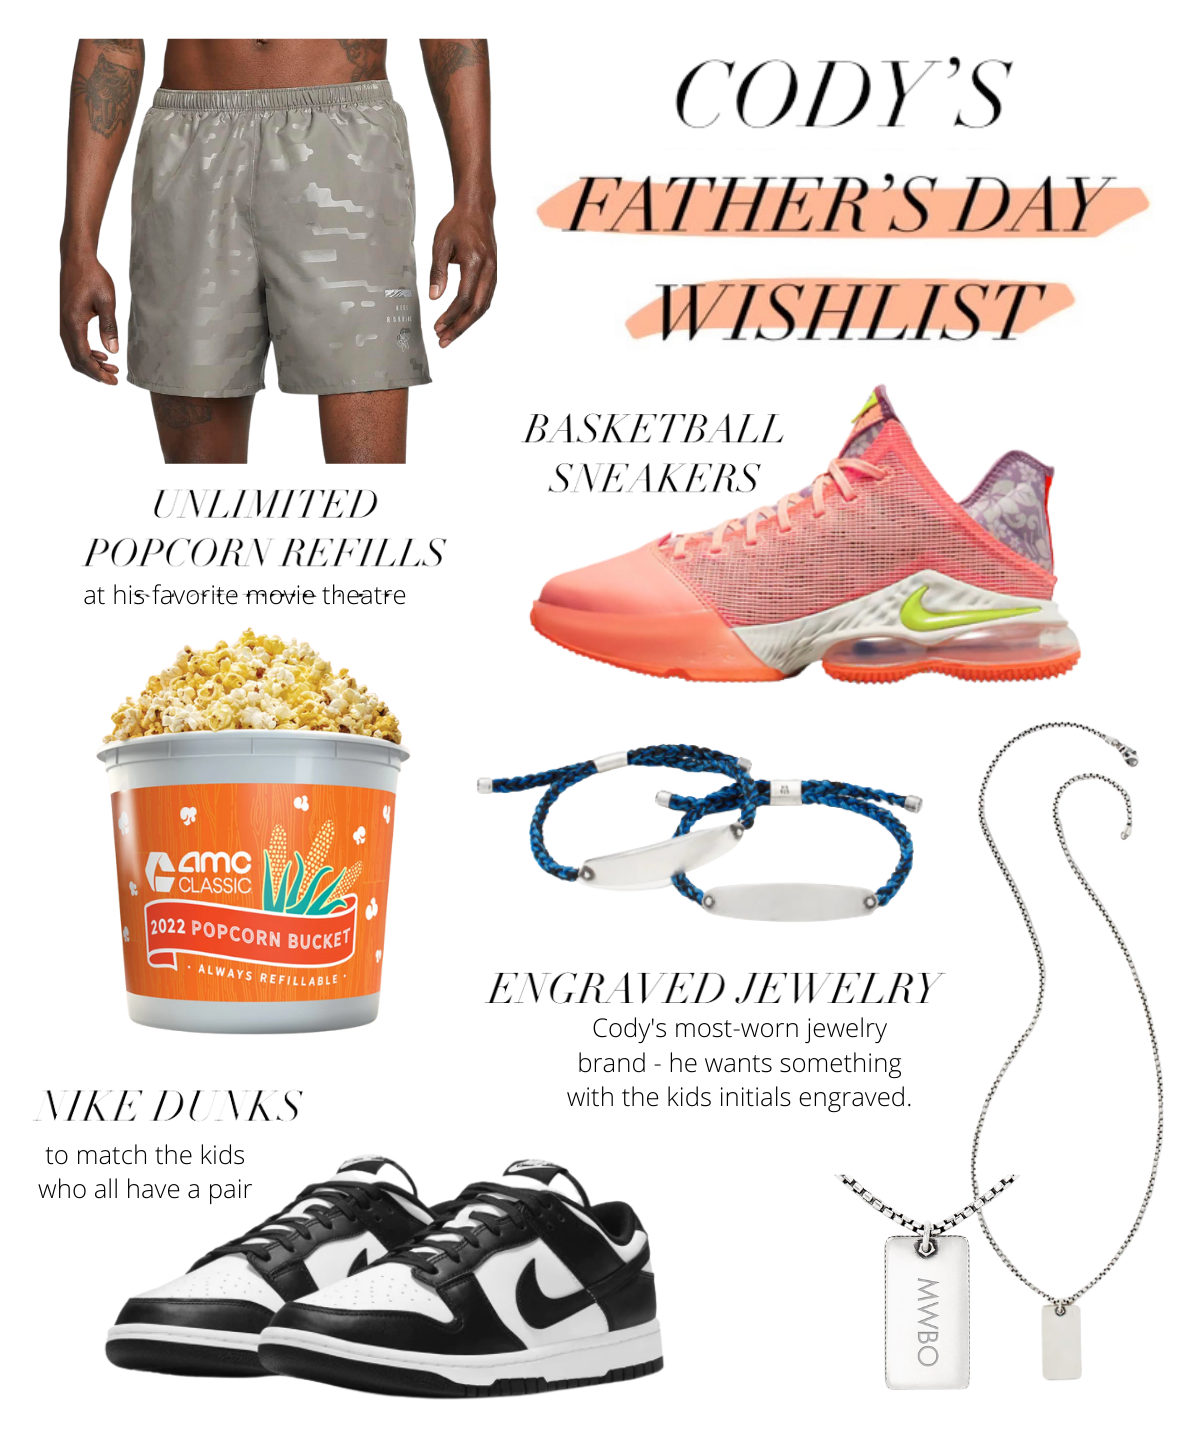 Cody's wishlist, Father's Day wish list, gift ideas, fathers day gift guide, nike shorts, basketball sneakers, Nike Dunks, engraved jewlelry, Kendra Scott 